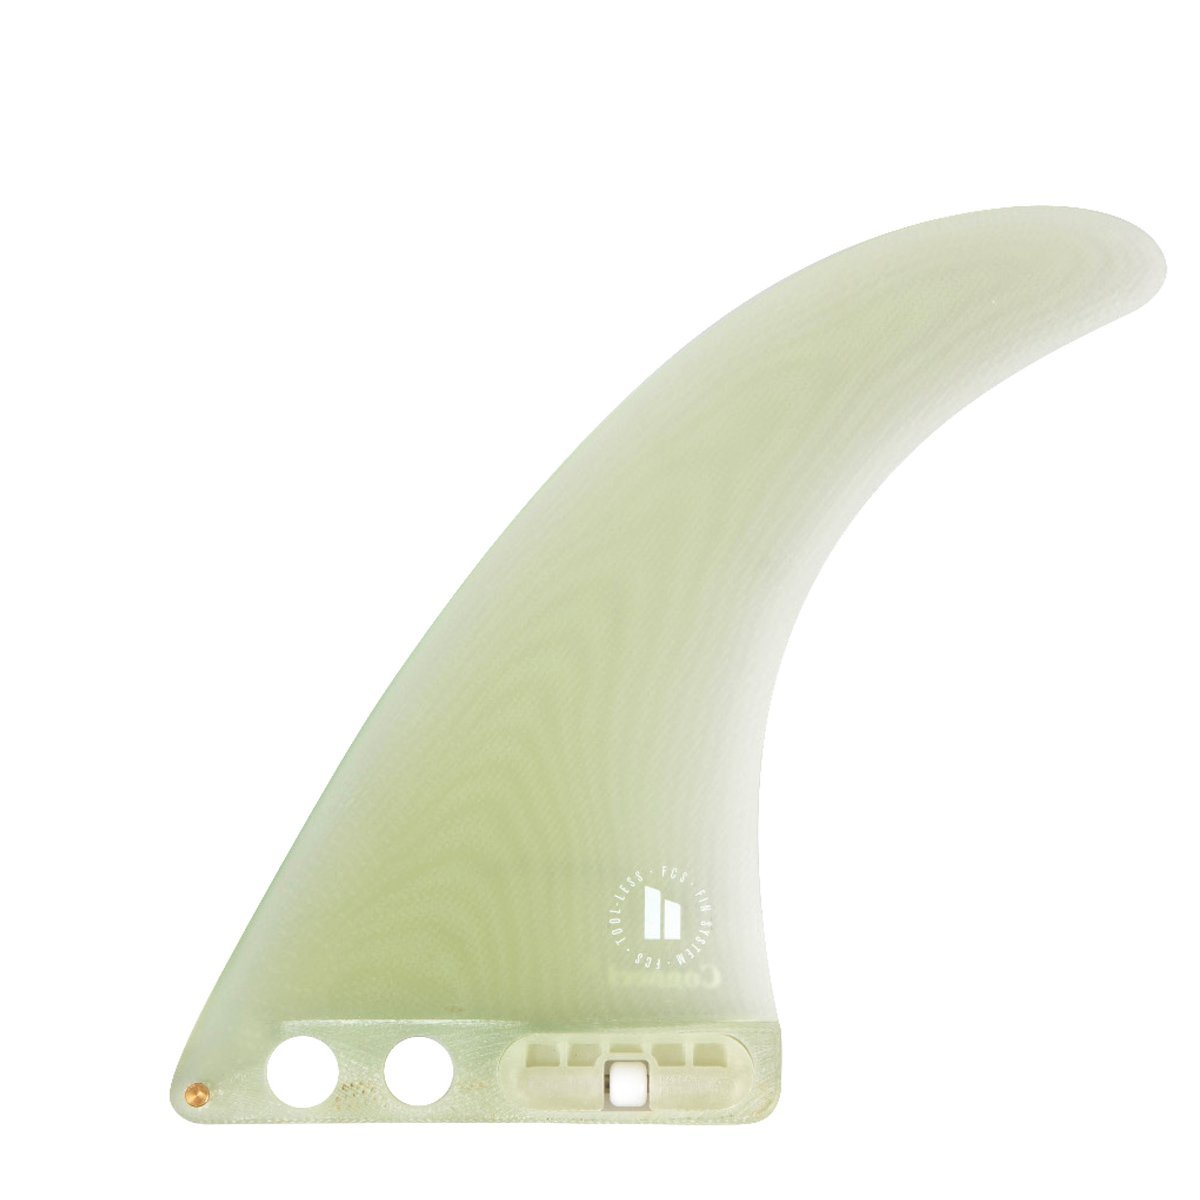 FCS2 エフシーエスツー ロングボード センターフィン 6.0" CONNECT PG LONGBOARD FIN コネクト シングルフィン Clear